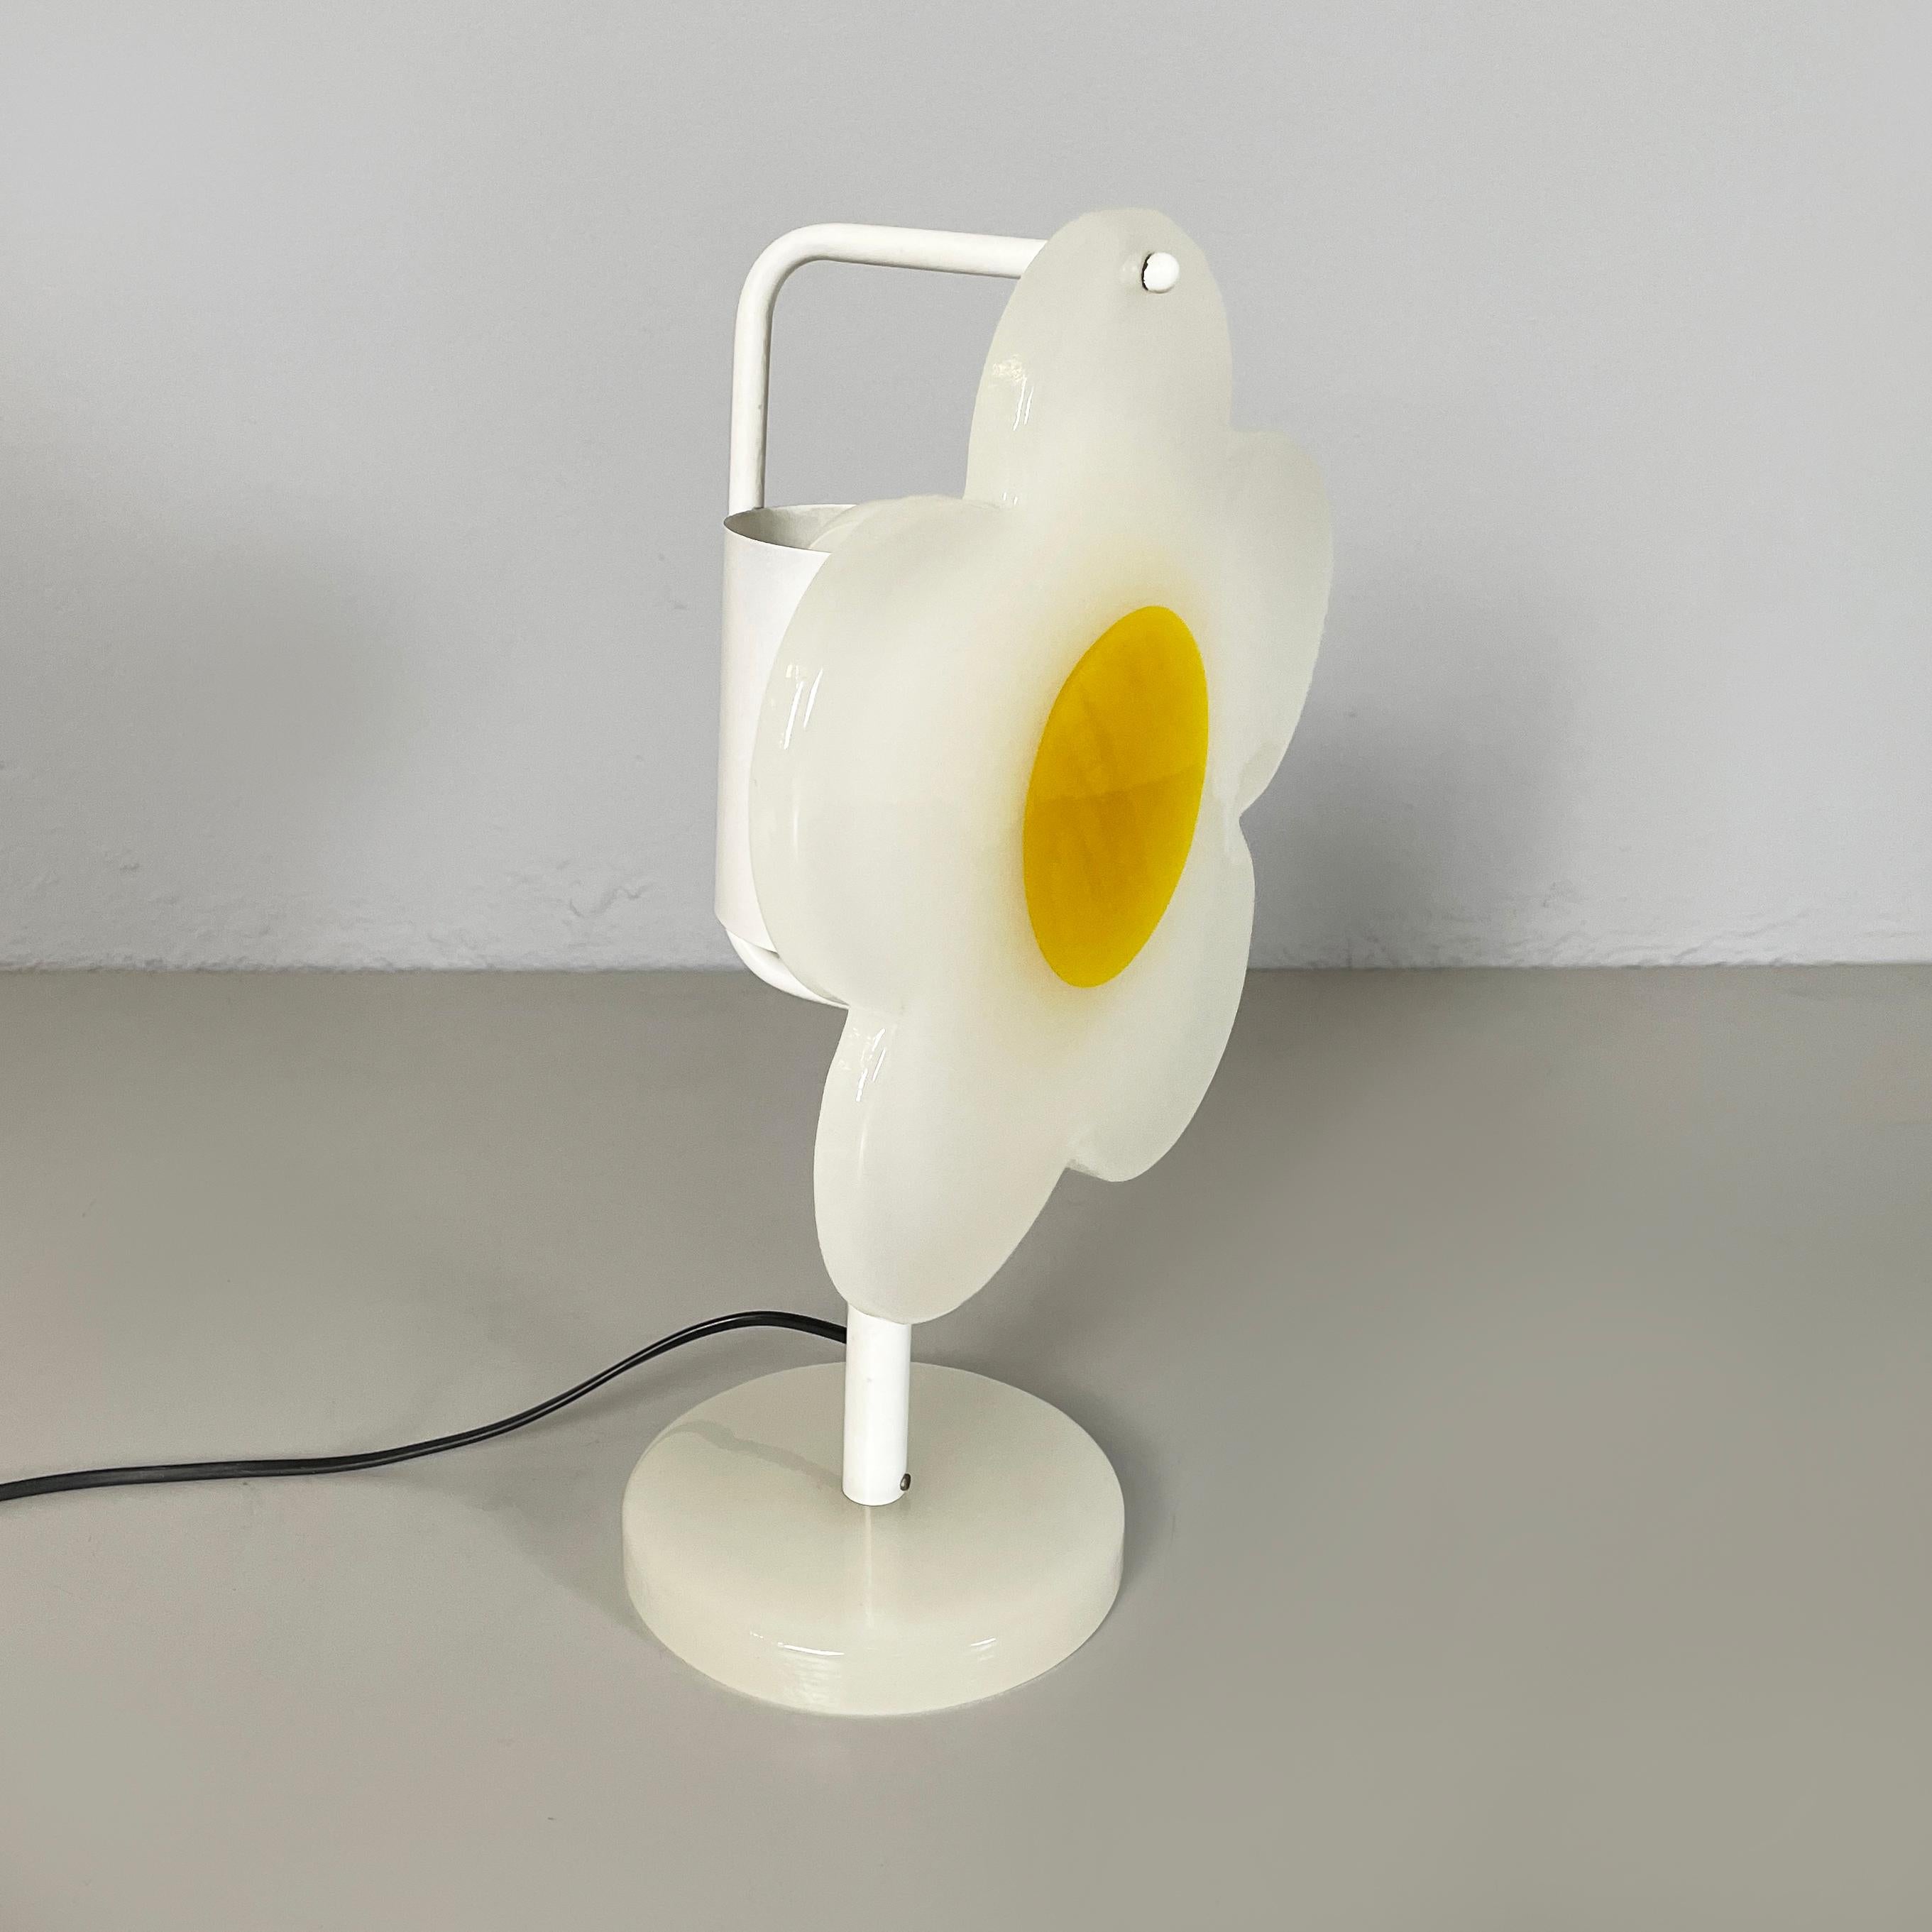 Italian modern glass table lamp Fiore  in daisy flower shape by Paf Studio 1980s
Table lamp mod. Fiore with thick yellow and white glass diffuser in the shape of a daisy flower. The diffuser is supported by the white painted metal rod structure. The